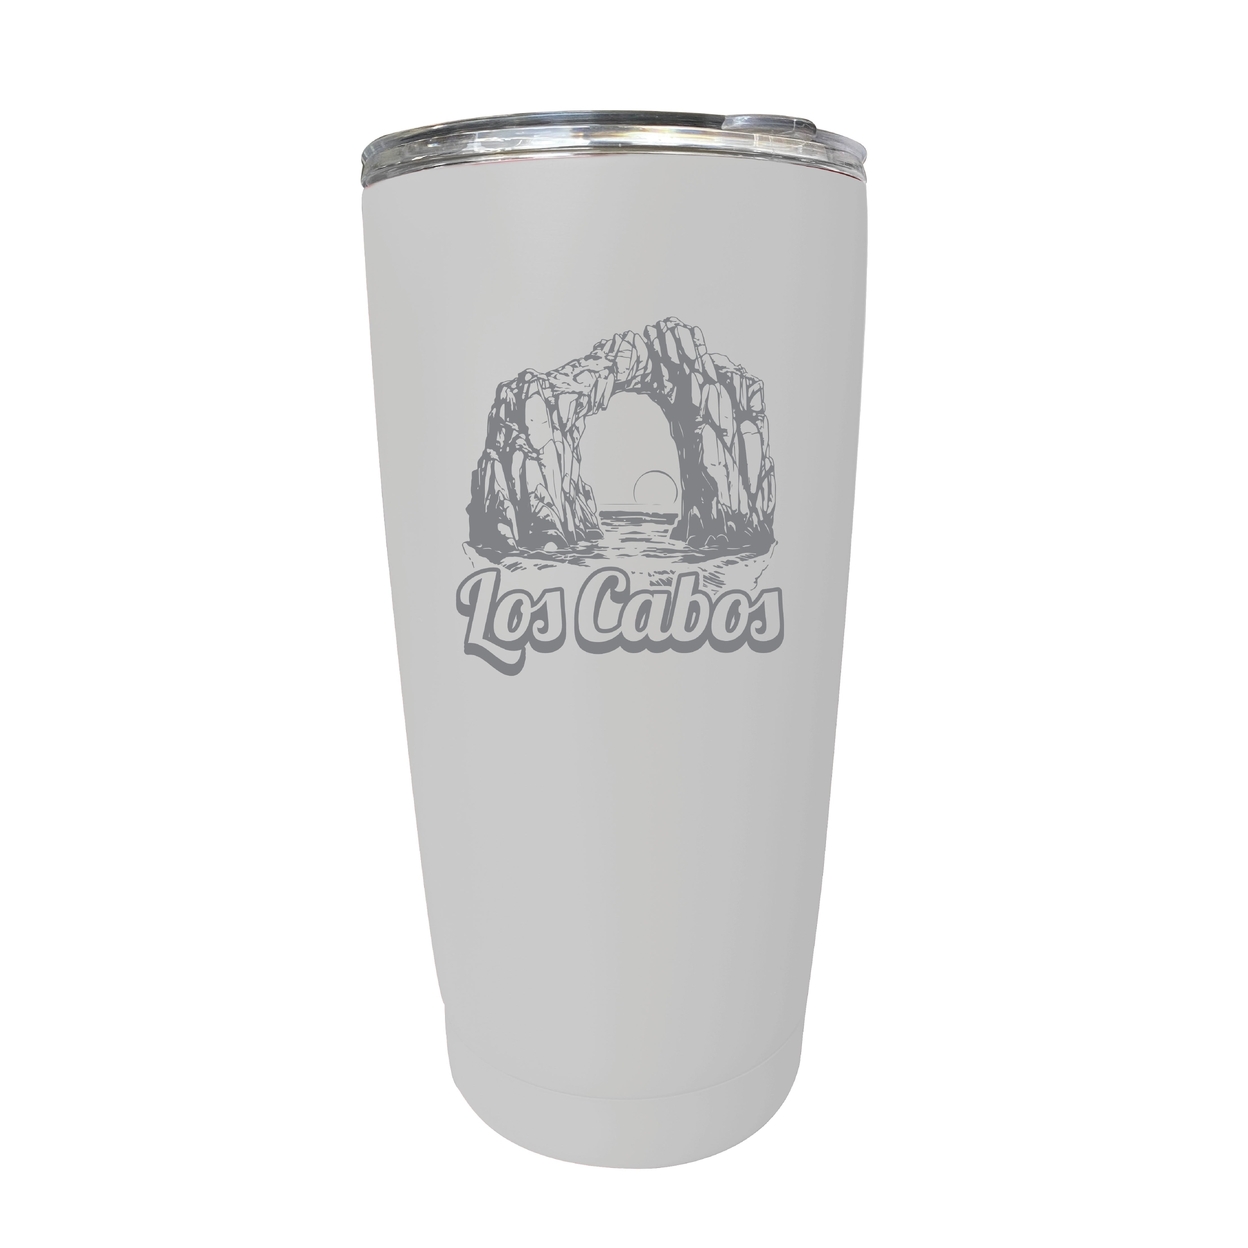 Los Cabos Mexico Souvenir 16 Oz Engraved Stainless Steel Insulated Tumbler - Red,,2-Pack